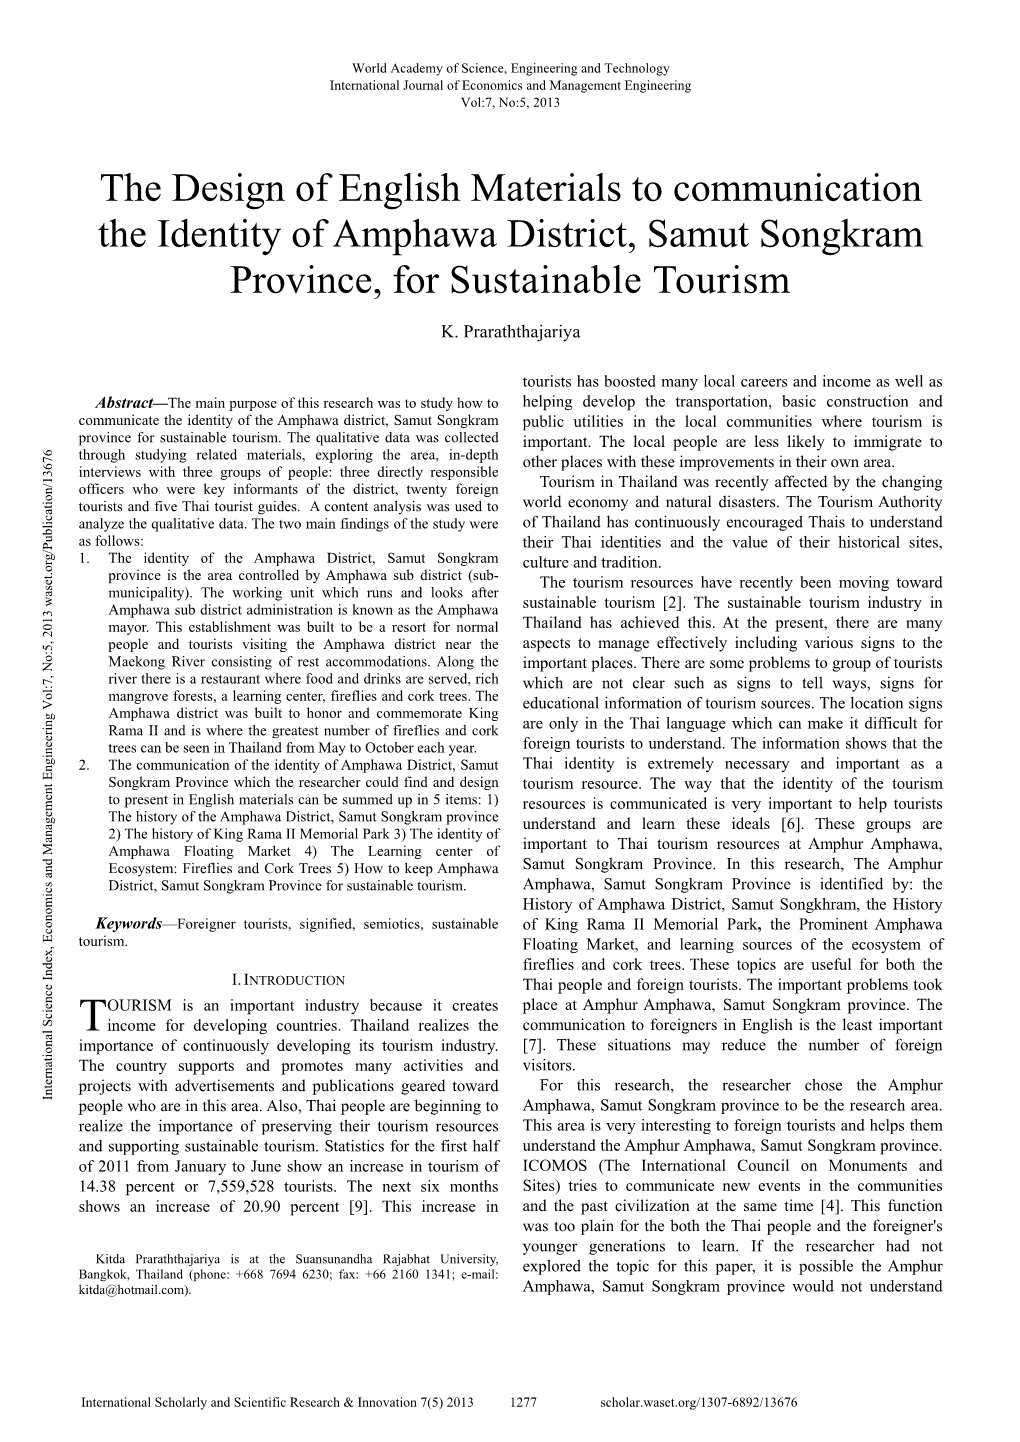 The Design of English Materials to Communication the Identity of Amphawa District, Samut Songkram Province, for Sustainable Tourism